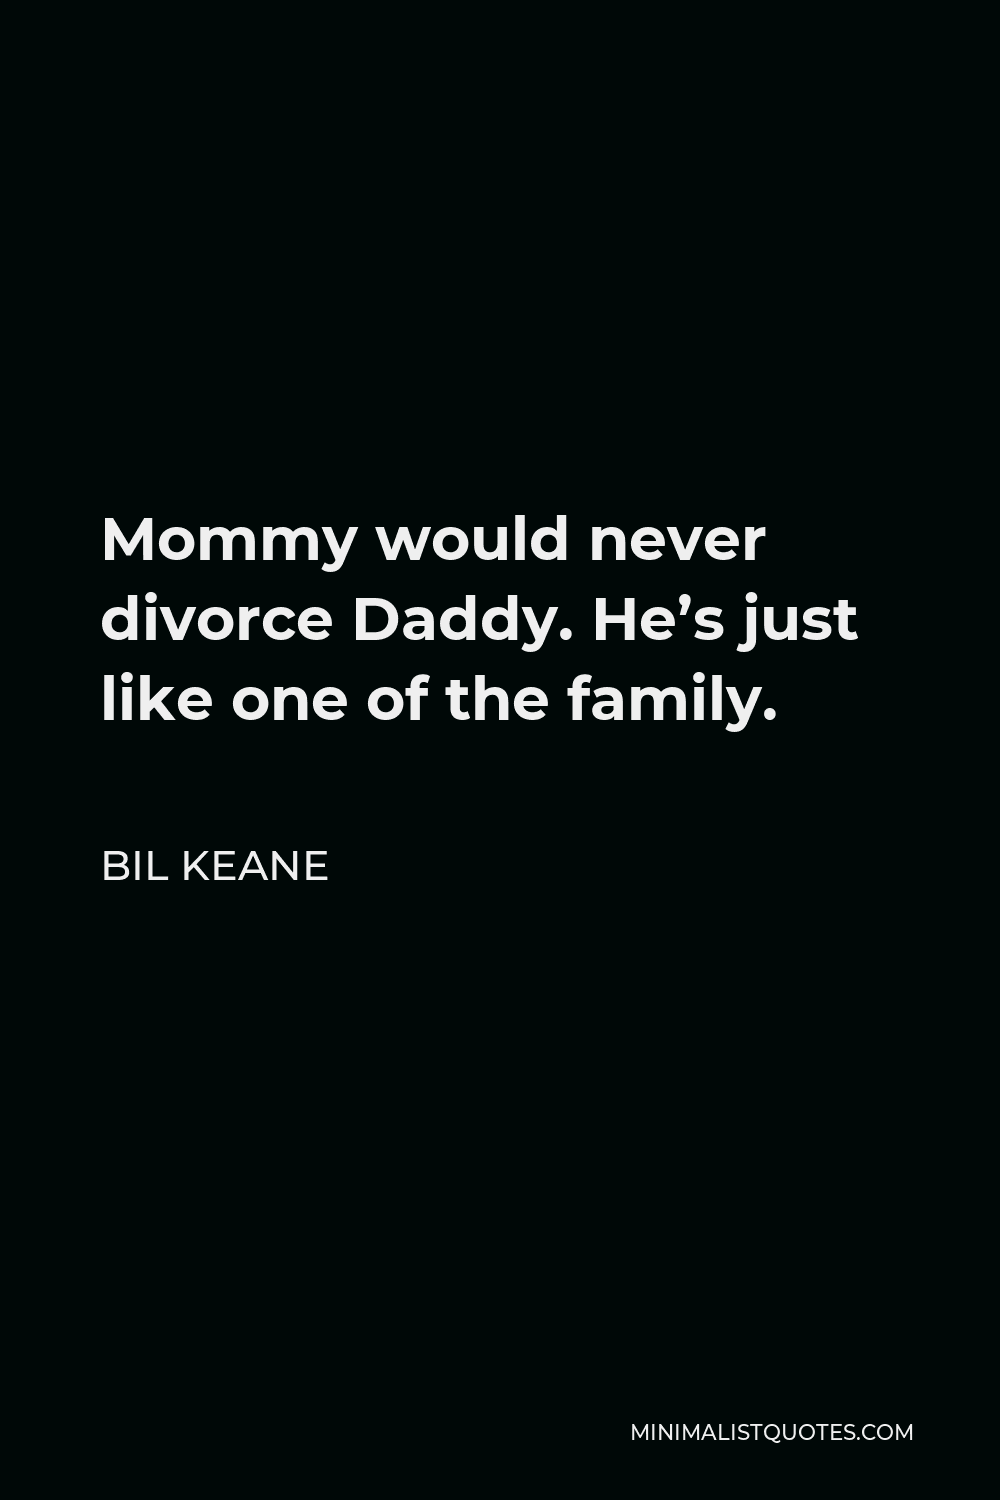 Bil Keane Quote - Mommy would never divorce Daddy. He’s just like one of the family.